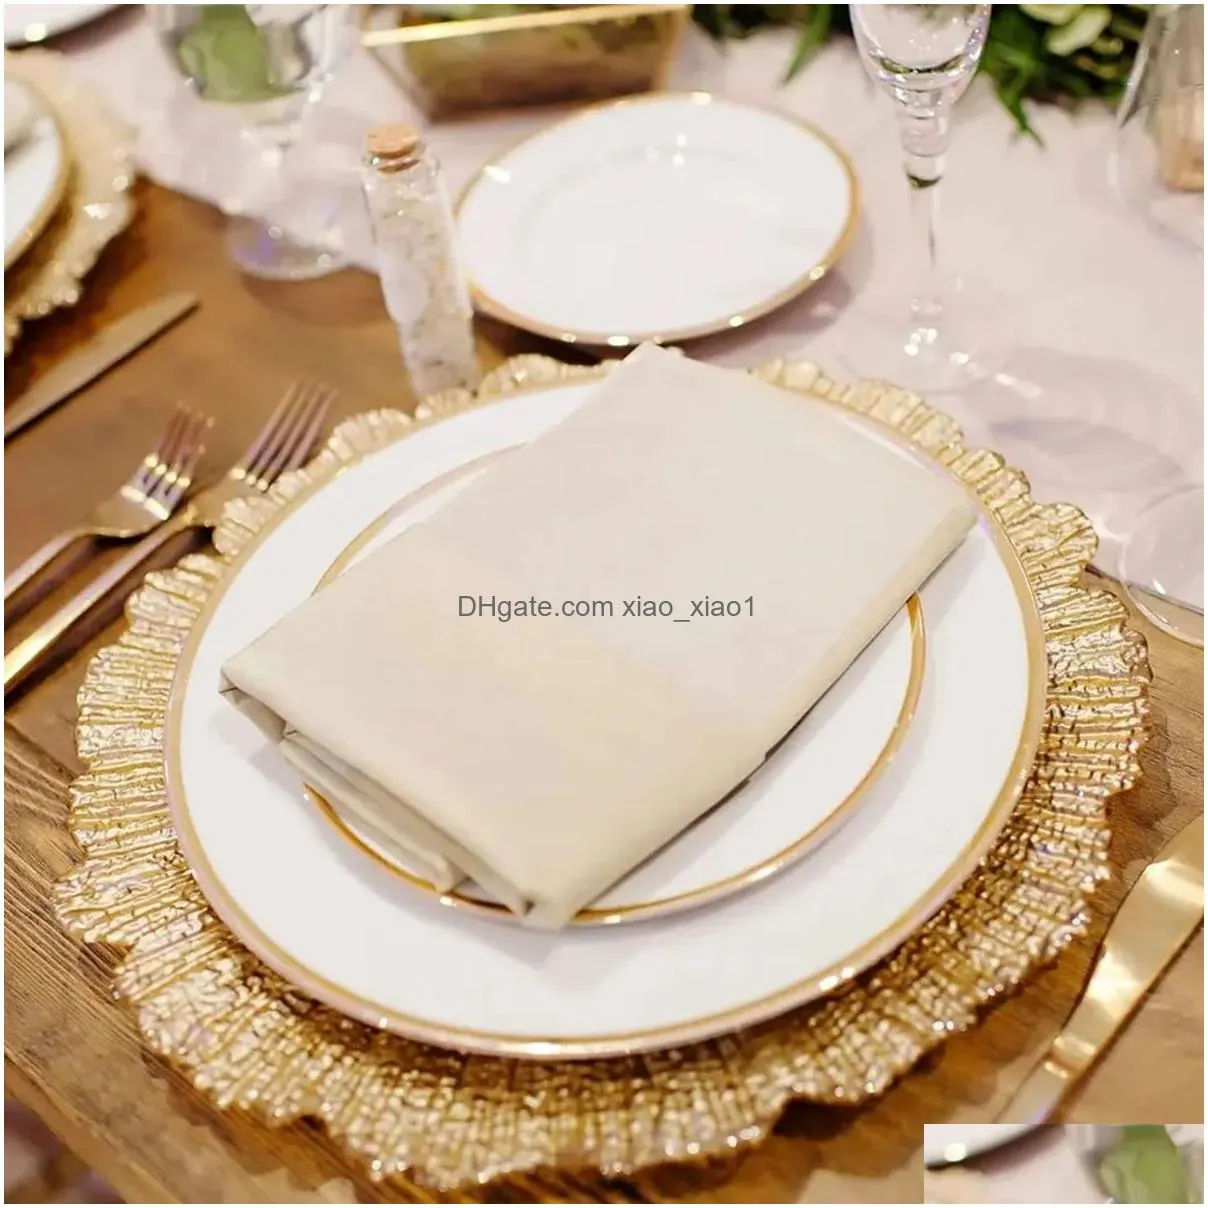 event party decoration round 13 about 33.0 cm gold  plates for dinner plates weddings elegant decoration 202303